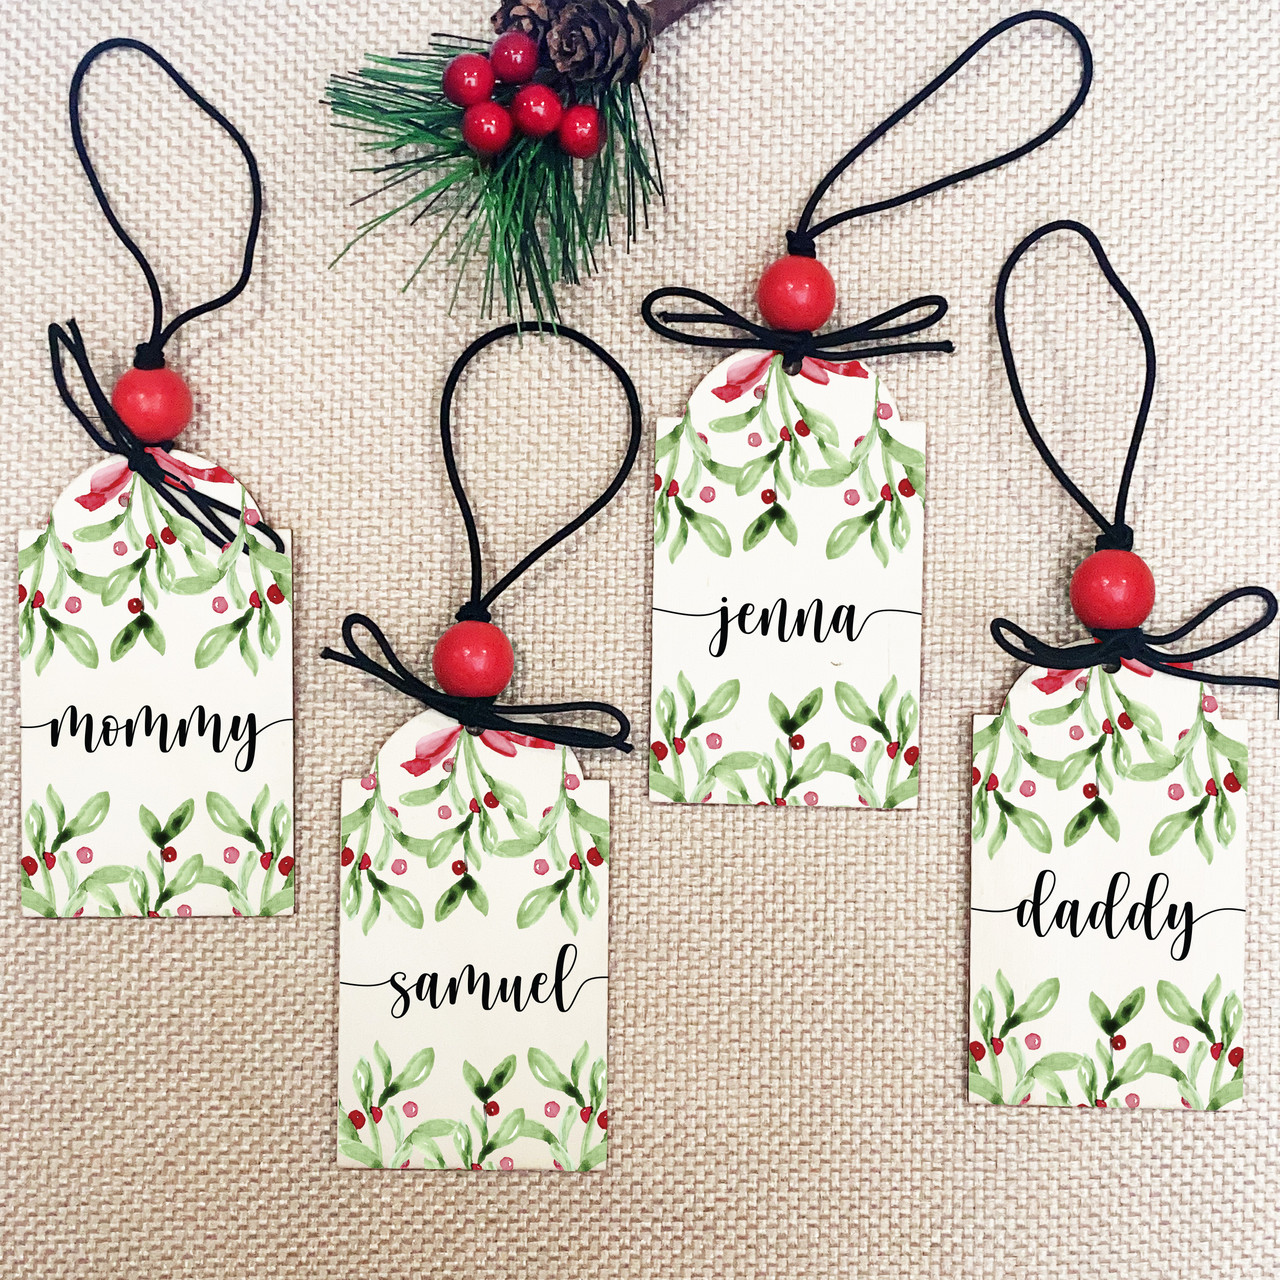 https://cdn11.bigcommerce.com/s-5grzuu6/images/stencil/1280x1280/products/6368/51031/Watercolor-Holly-Custom_Christmas-Wood-Stocking-Tags_with_Names__14534.1667602935.jpg?c=2